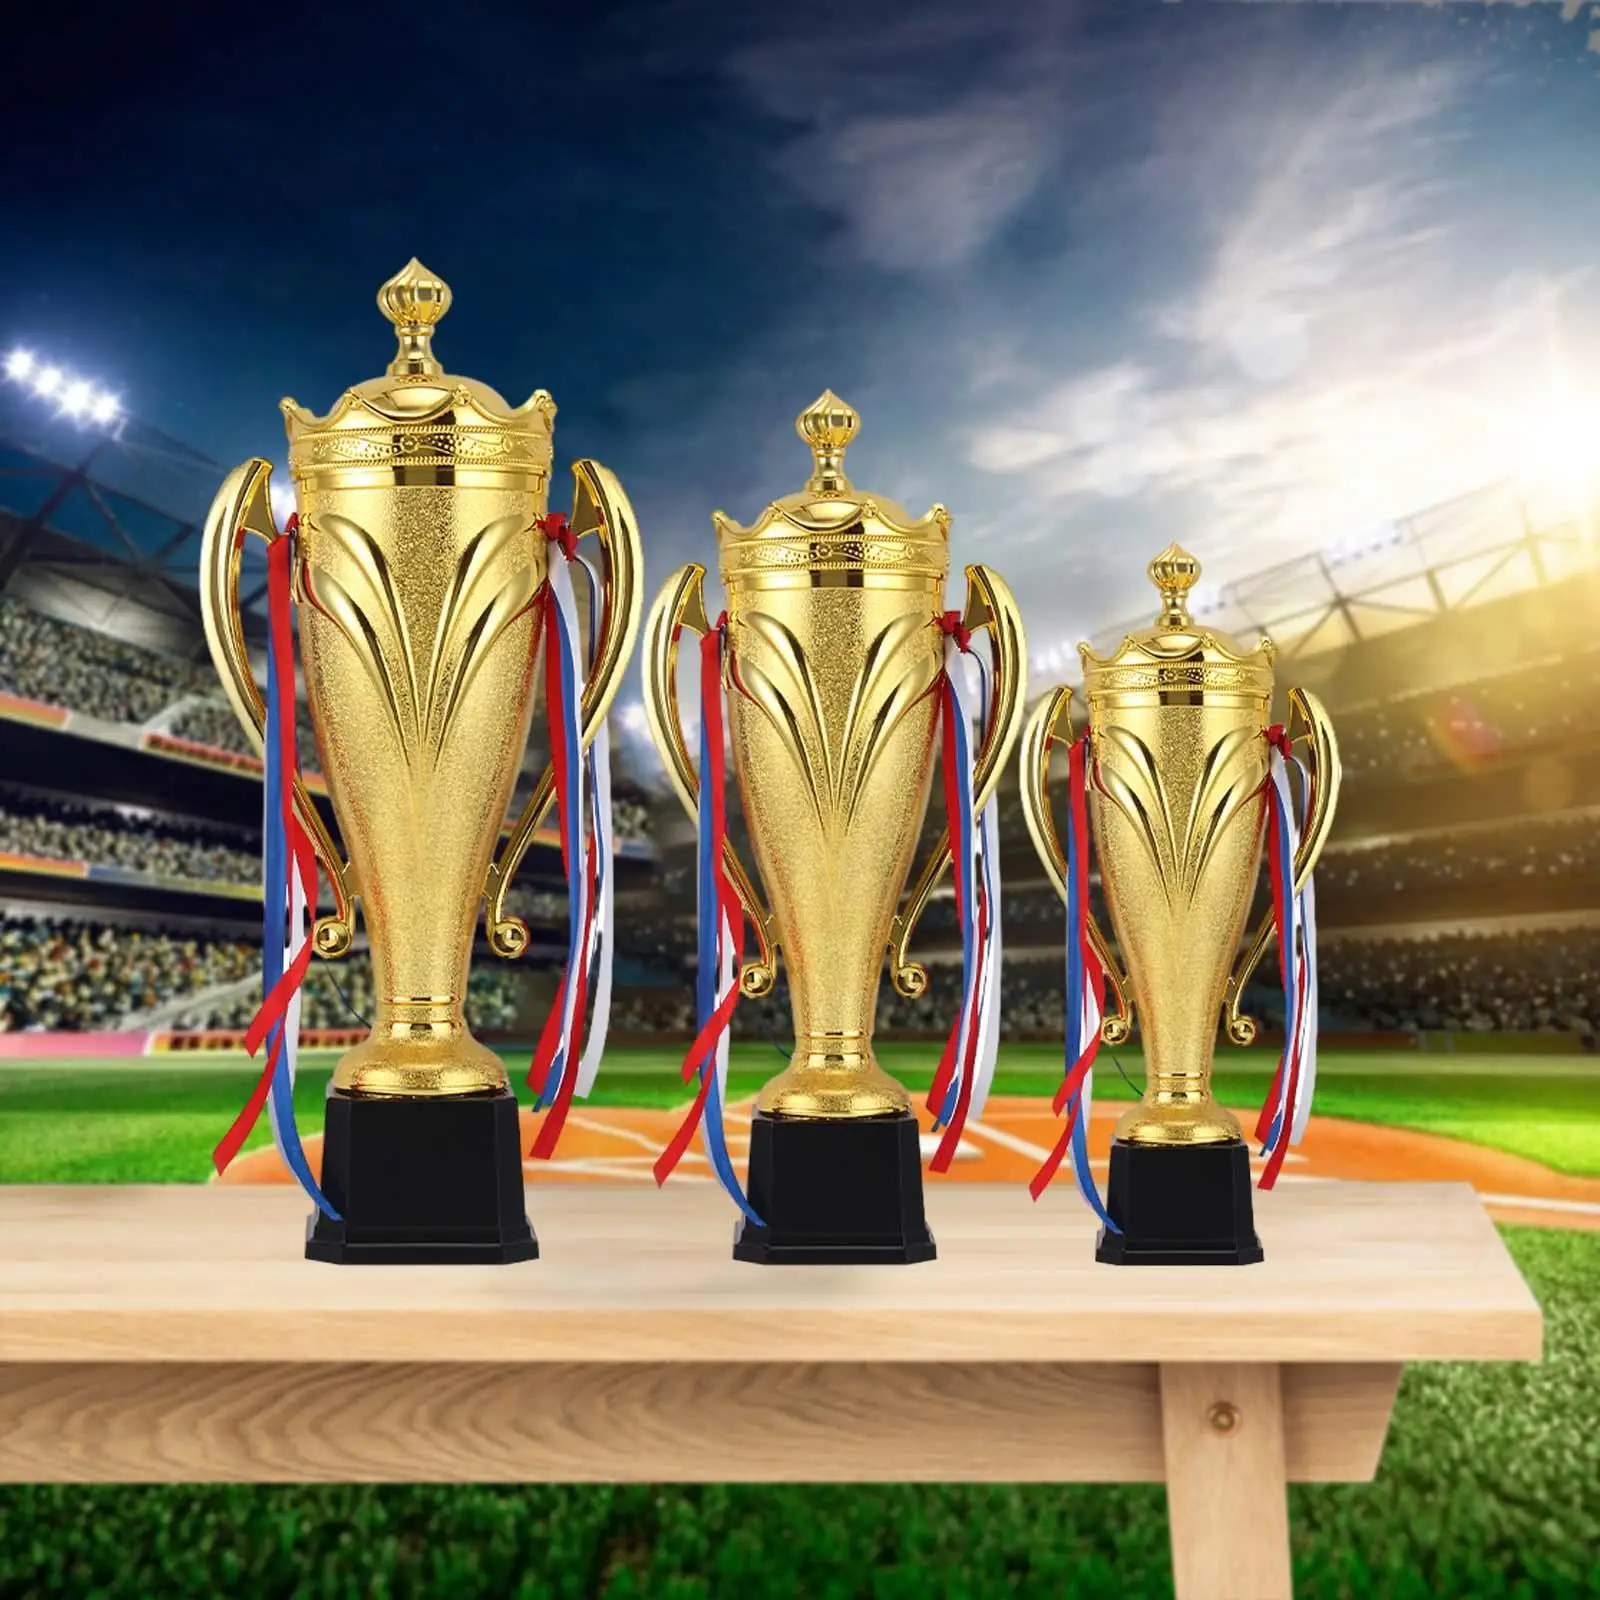 Child Trophy Cups PP Award Trophies Cup Versatile Smooth Surface Rewards Prizes Decorative for Games Awards Ceremonies